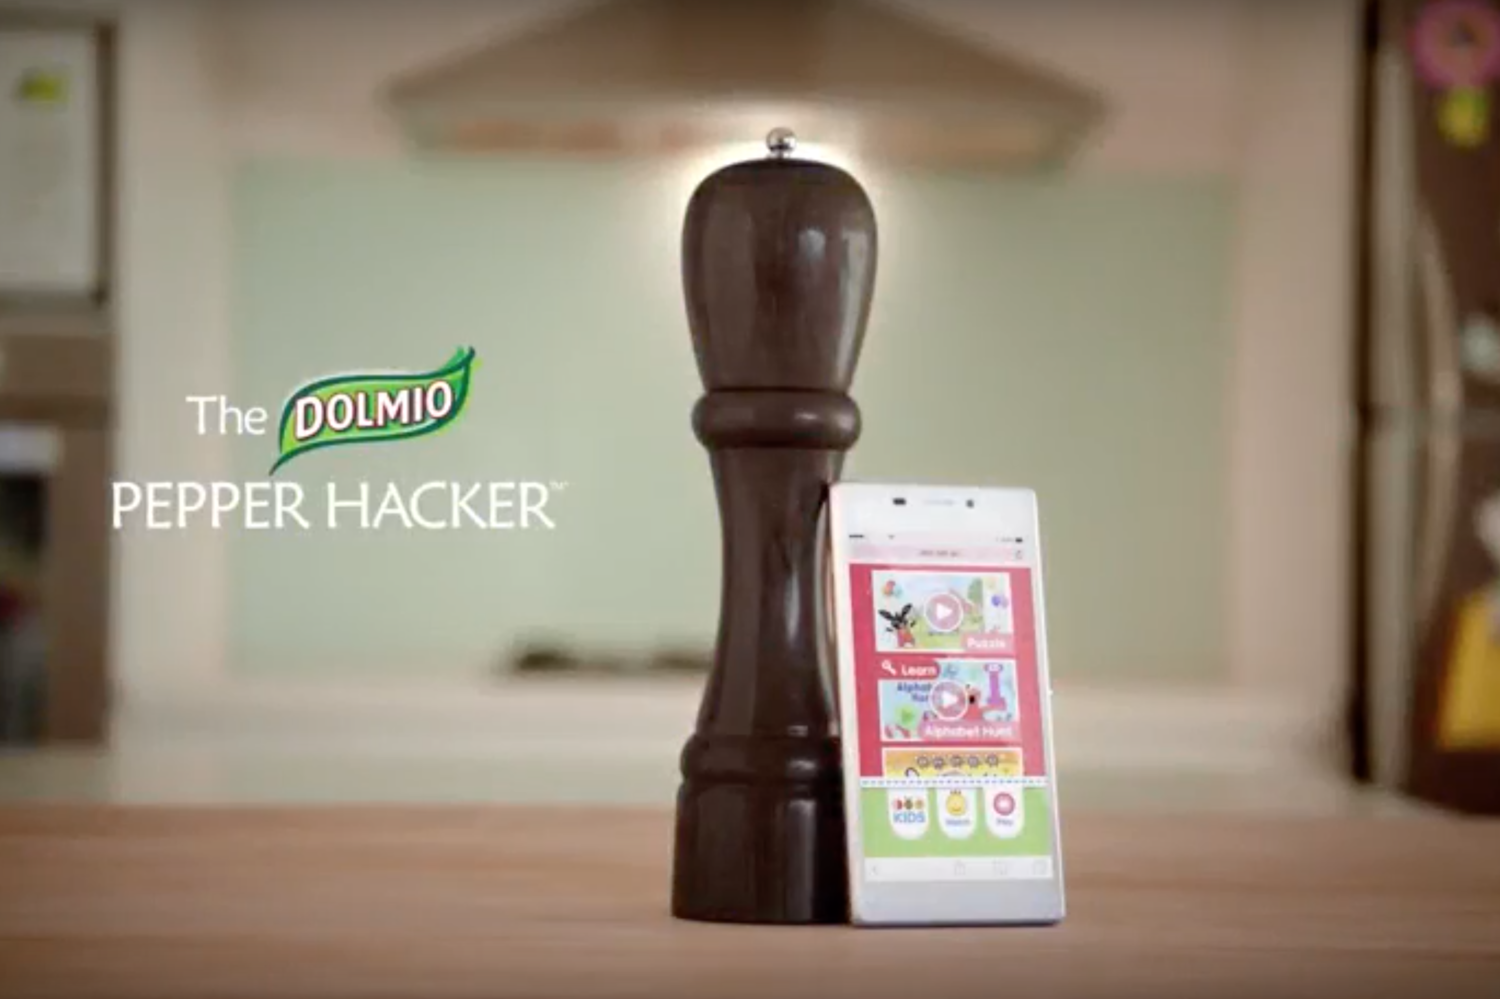 Dolmio backs up prank by putting the Pepper Hacker into production